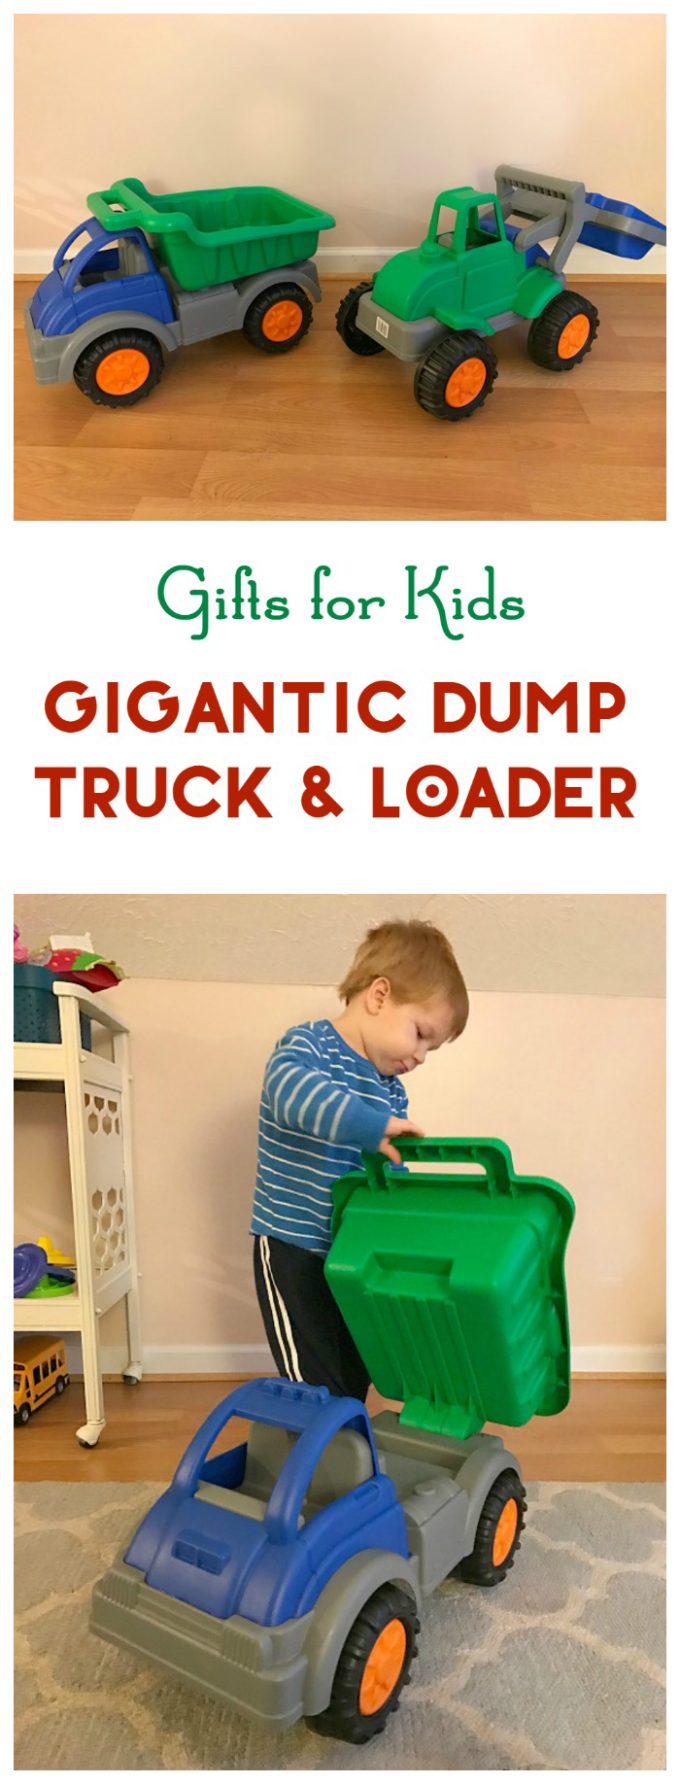 Gifts for Kids: Gigantic Dump Truck & Loader from American Plastic Toys Inc